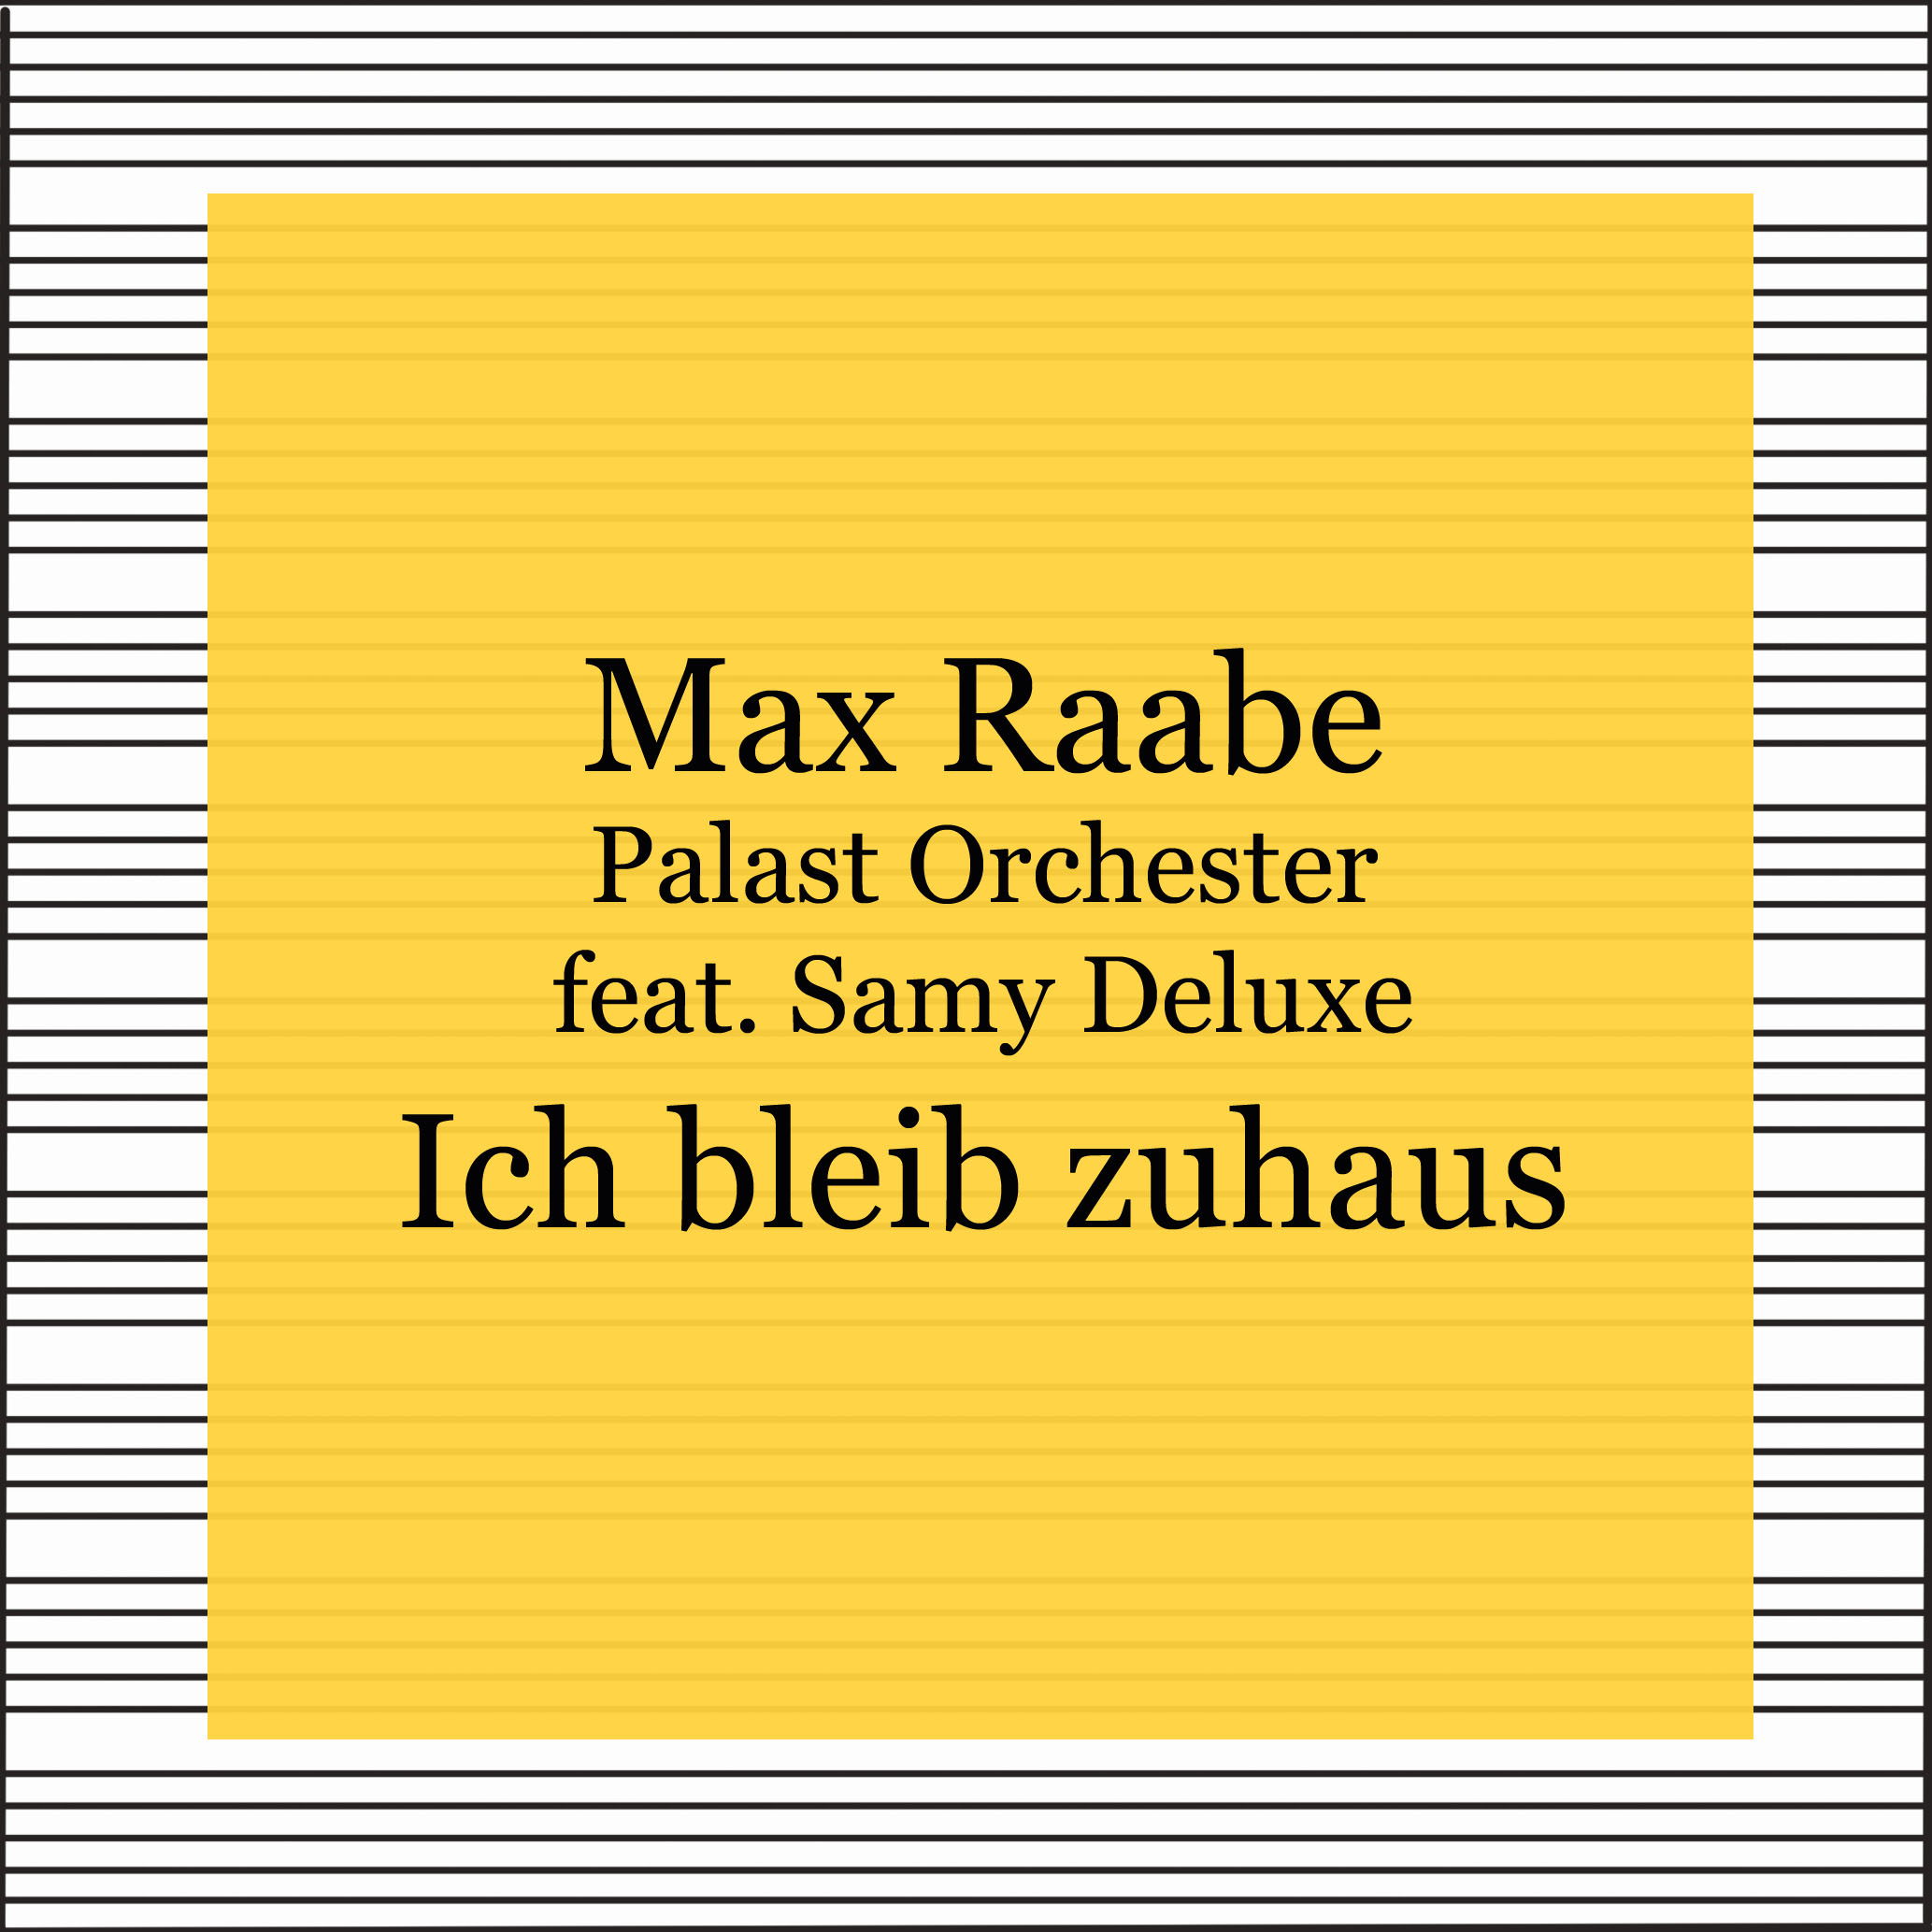 Max Raabe Palast Orchester feat. Samy Deluxe - kultur4all.de